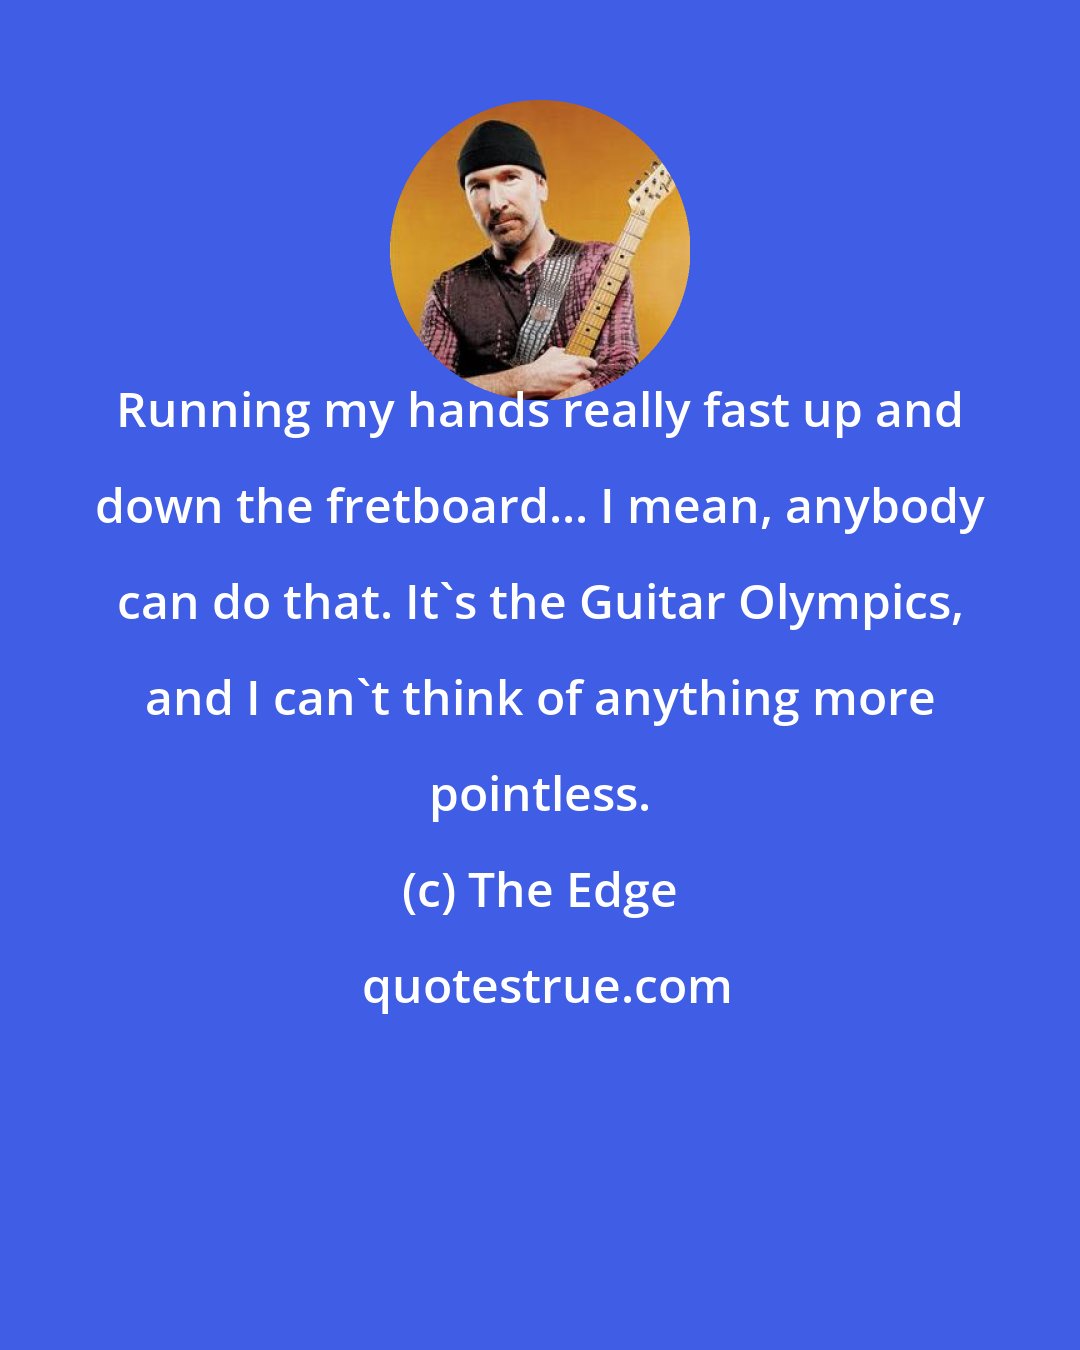 The Edge: Running my hands really fast up and down the fretboard... I mean, anybody can do that. It's the Guitar Olympics, and I can't think of anything more pointless.